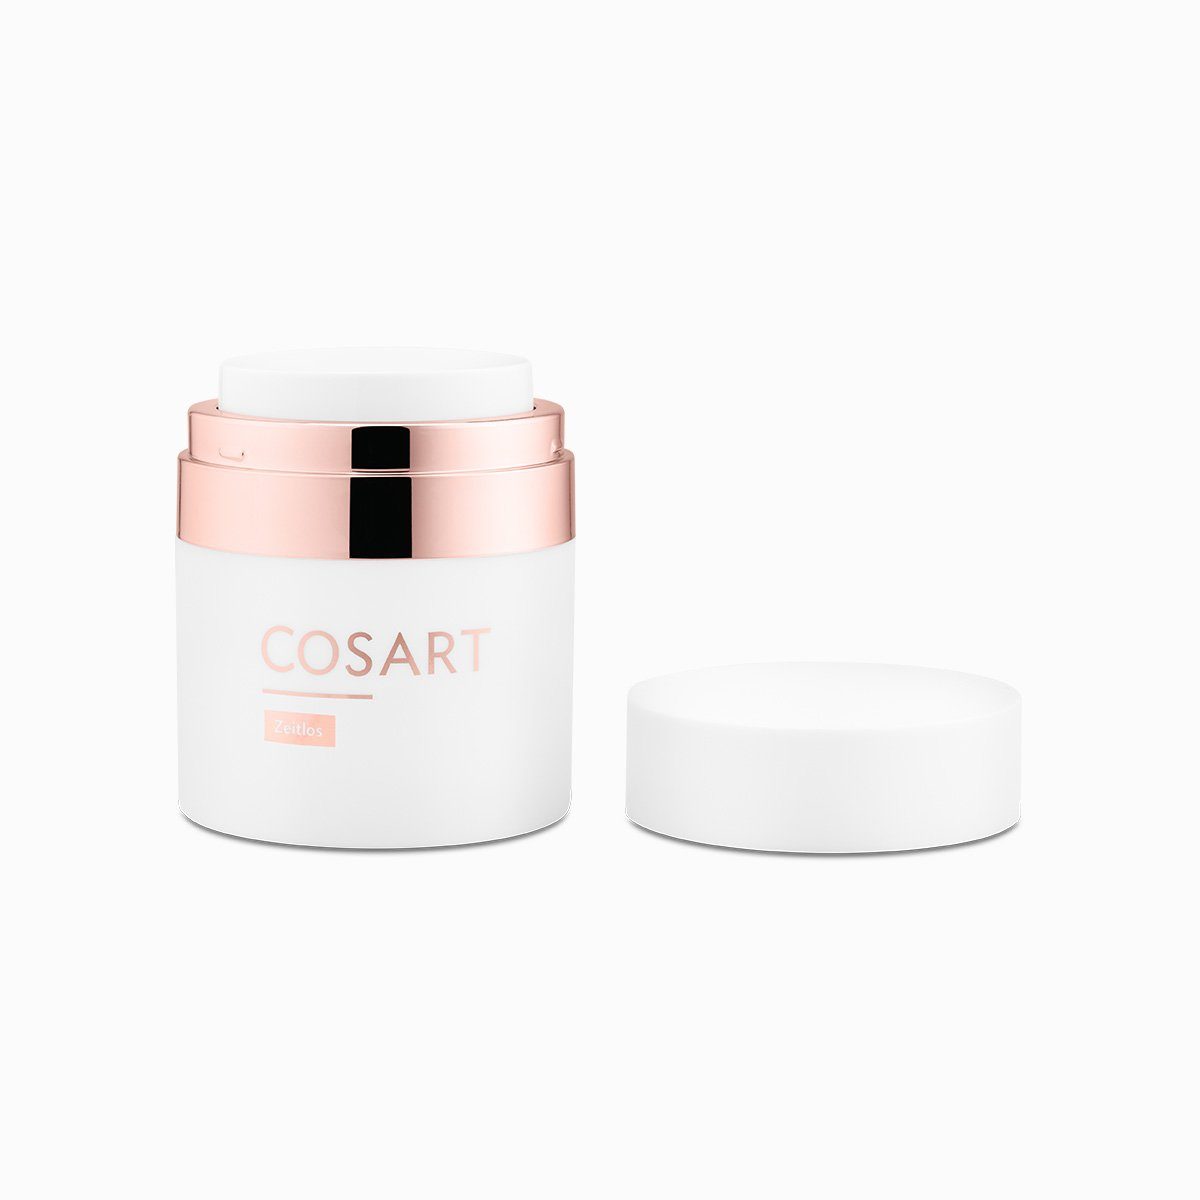 COSART Tagescreme COSART (50 ml) Tagescreme Zeitlos